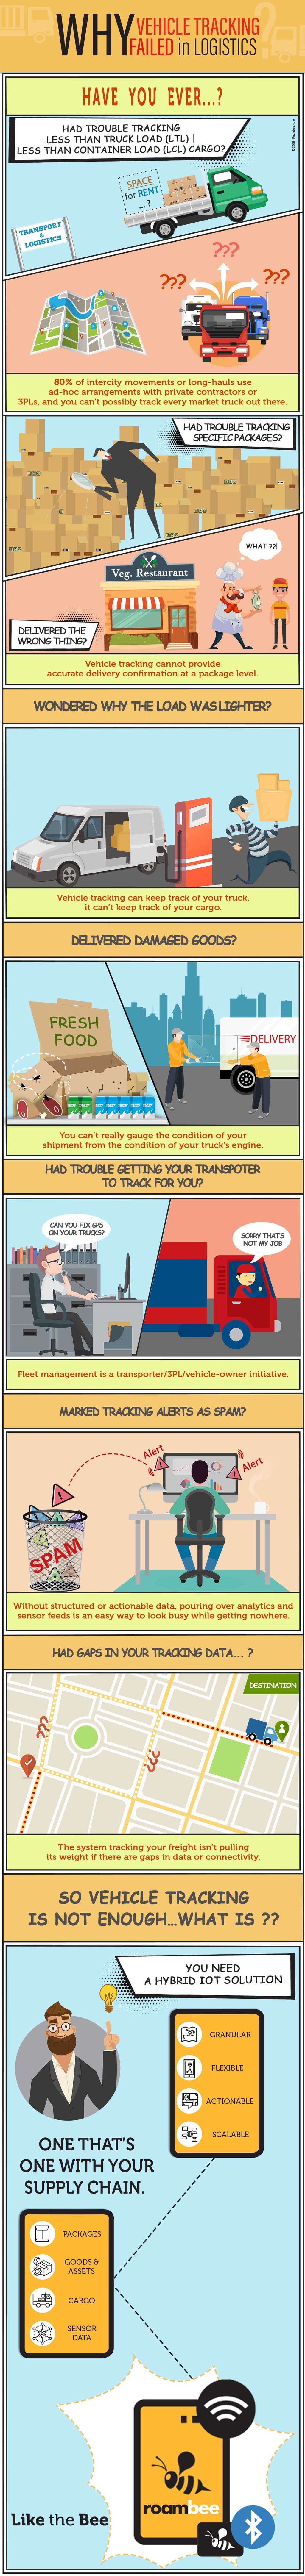 Why Vehicle Tracking Systems Failed in Logistics